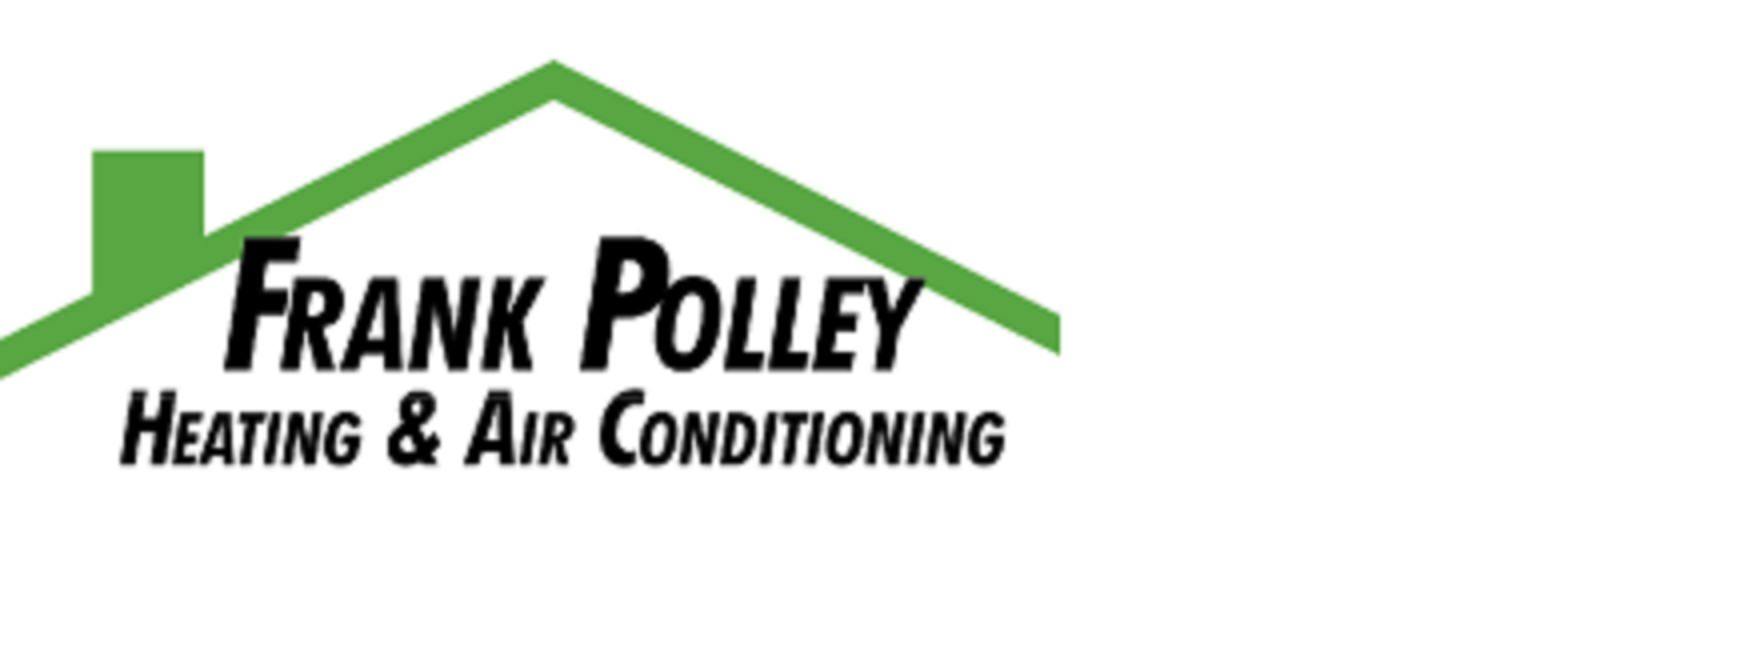 Frank Polley Heating & Air Conditioning Logo